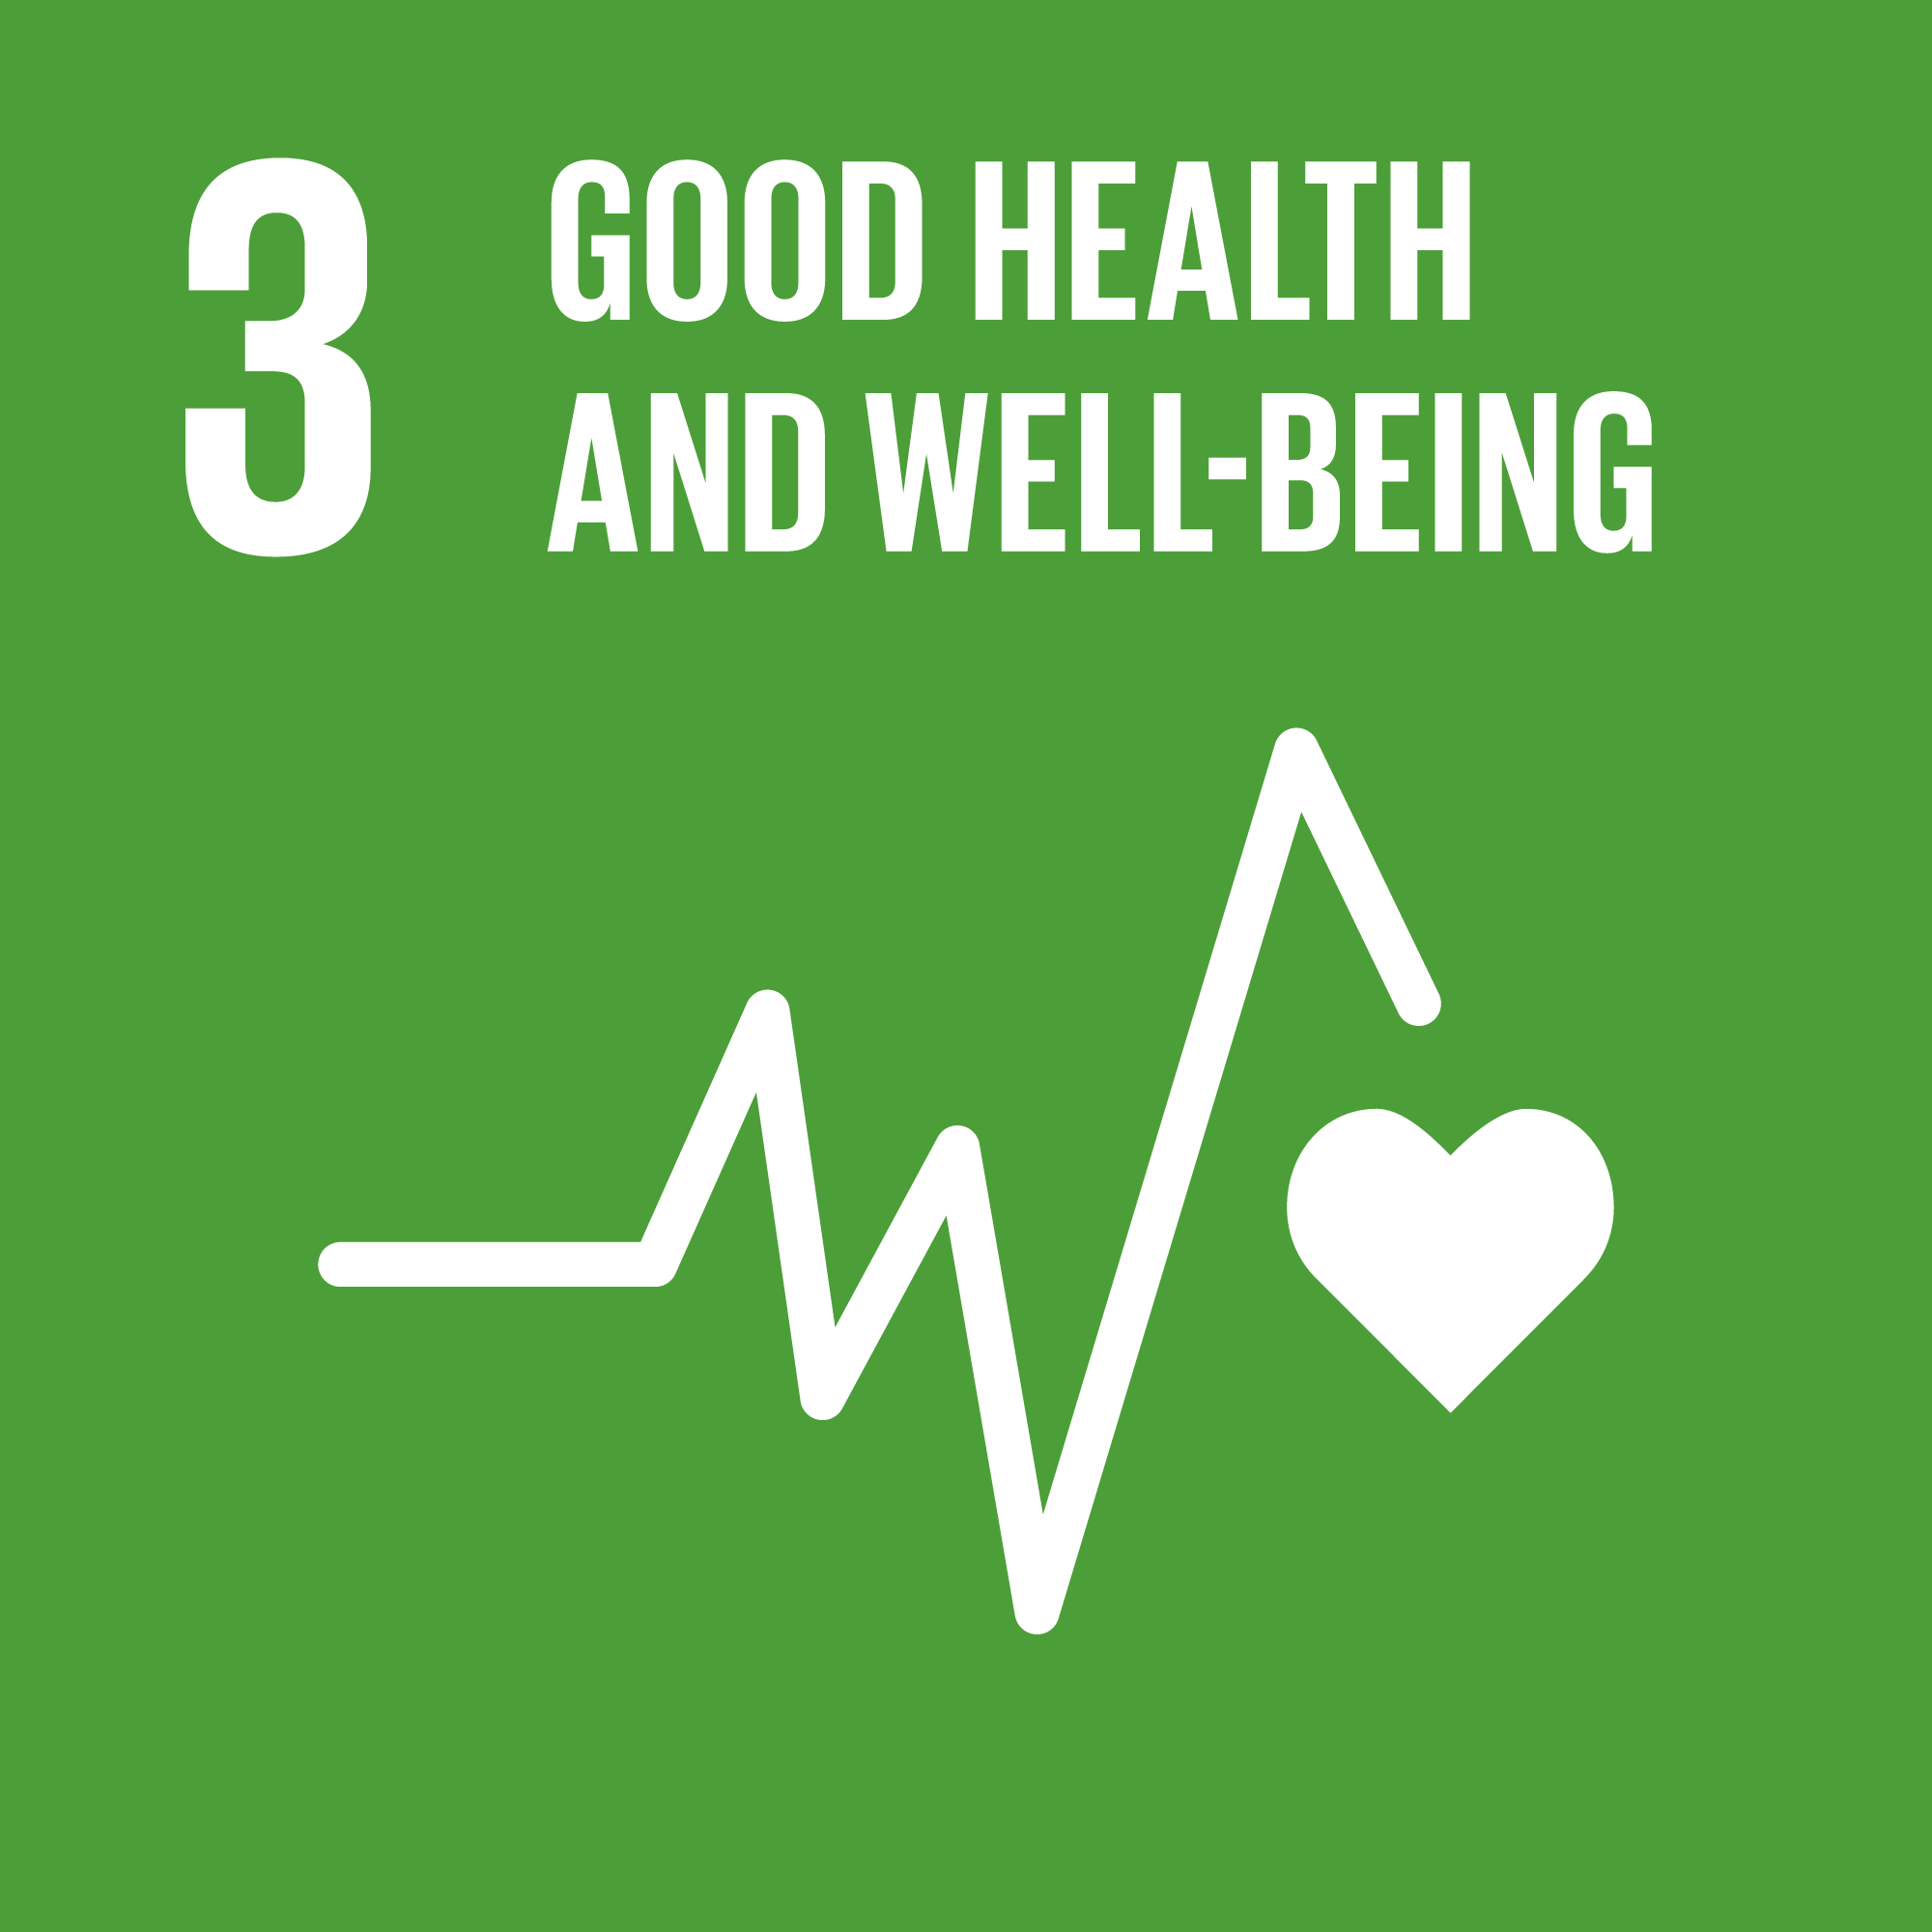 Sustainable Development Goal 3: Good Health and Well Being